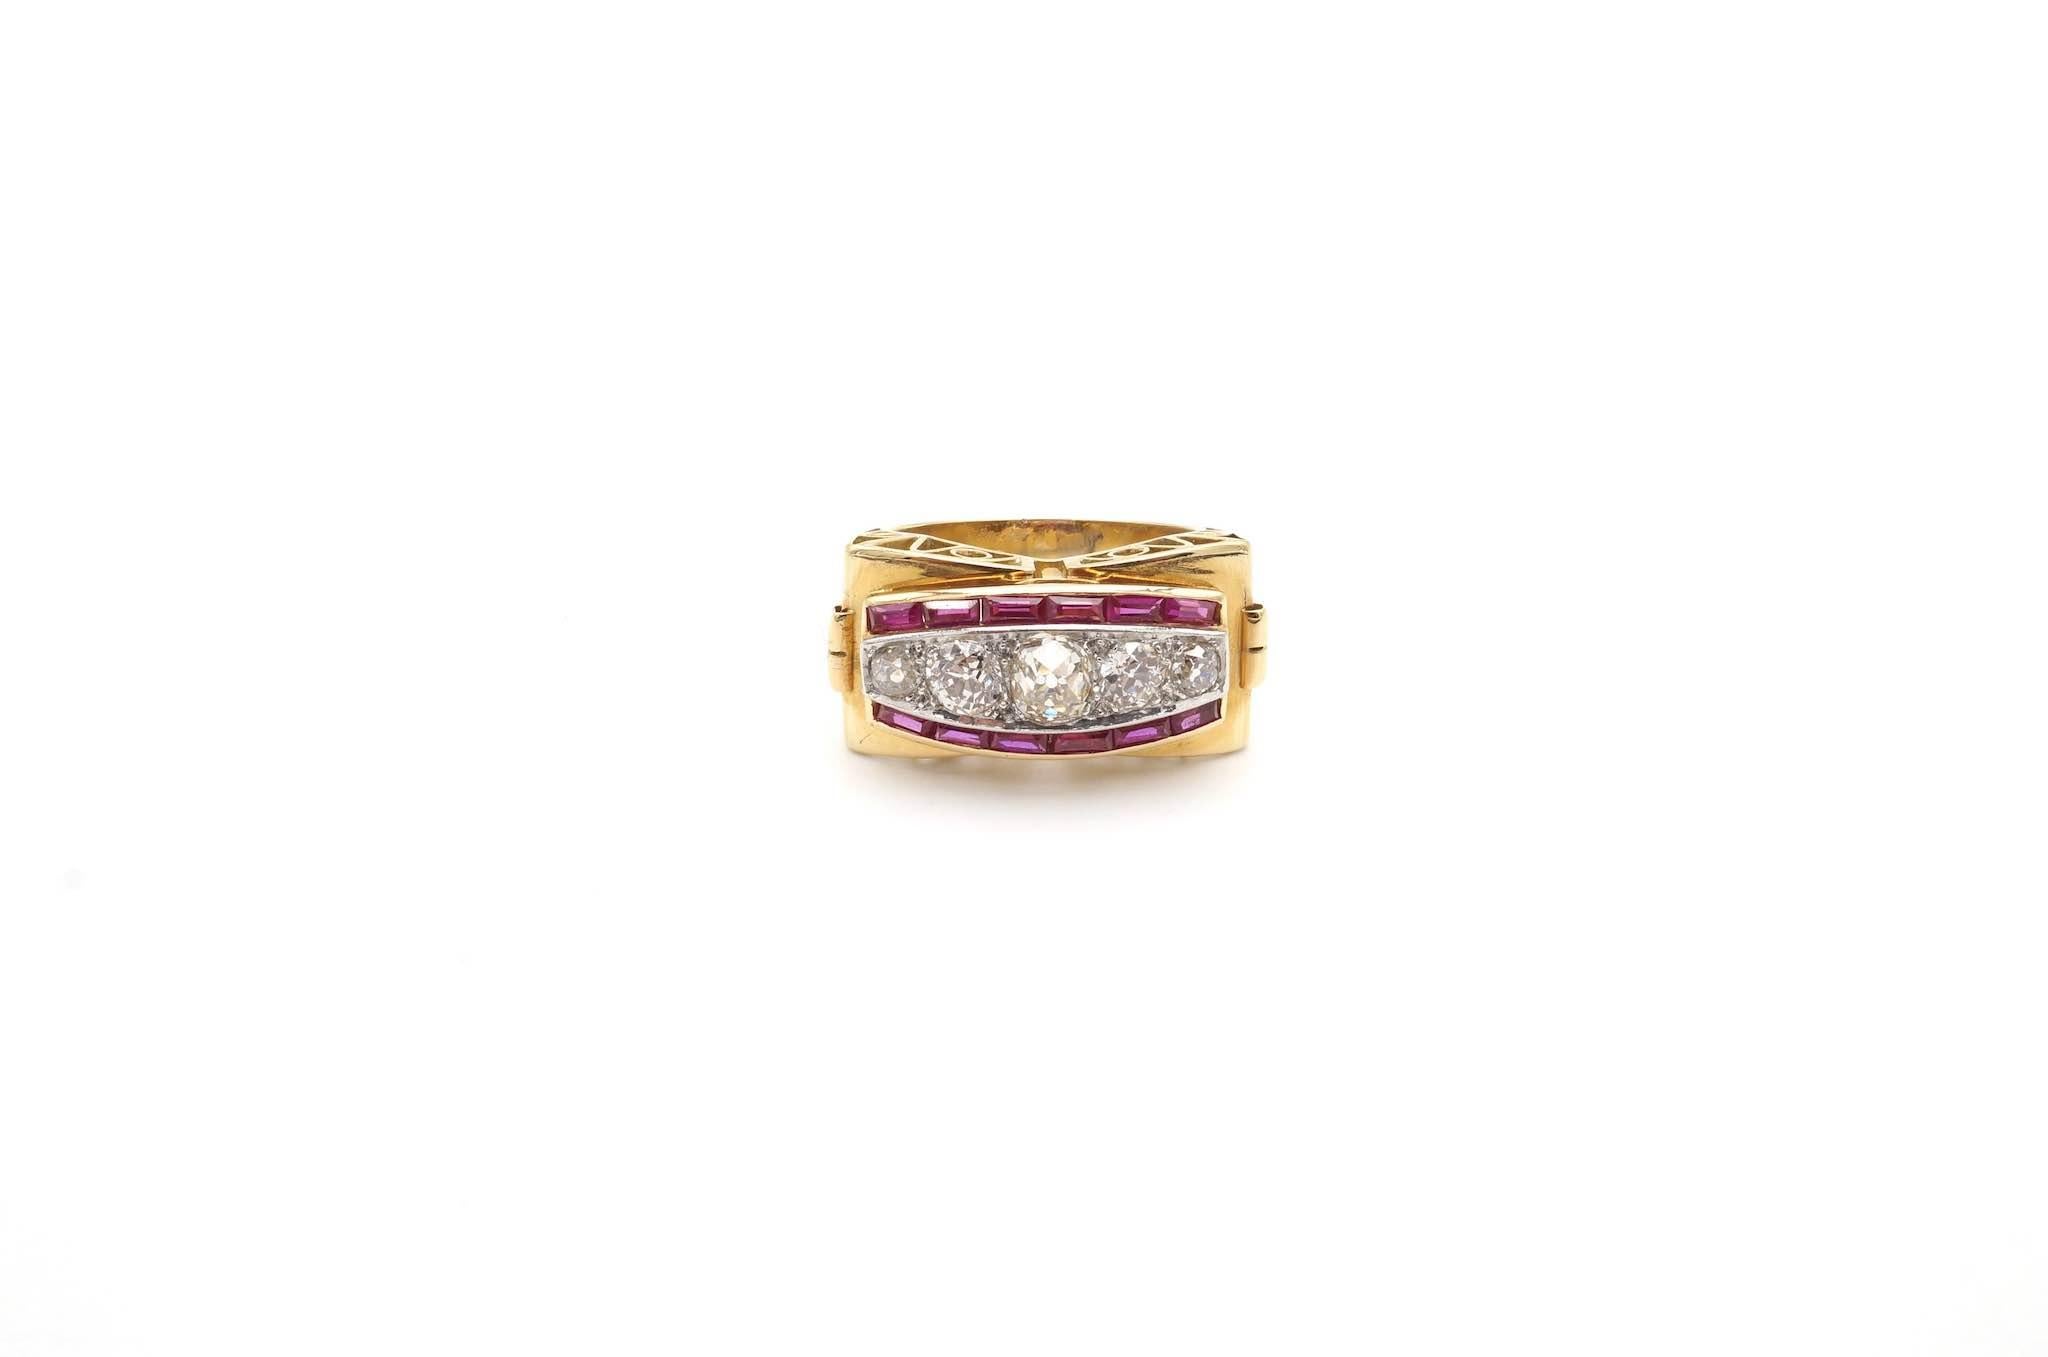 Stones: 5 diamonds for a total weight of 1.20 carats
and synthetic rubies
Material: Platinum and 18k yellow gold
Dimensions: 2.20 cm x 1.2 cm
Period: 1940
Weight: 9.6g
Size: 58 (free sizing)
Certificate
Ref. : 24715